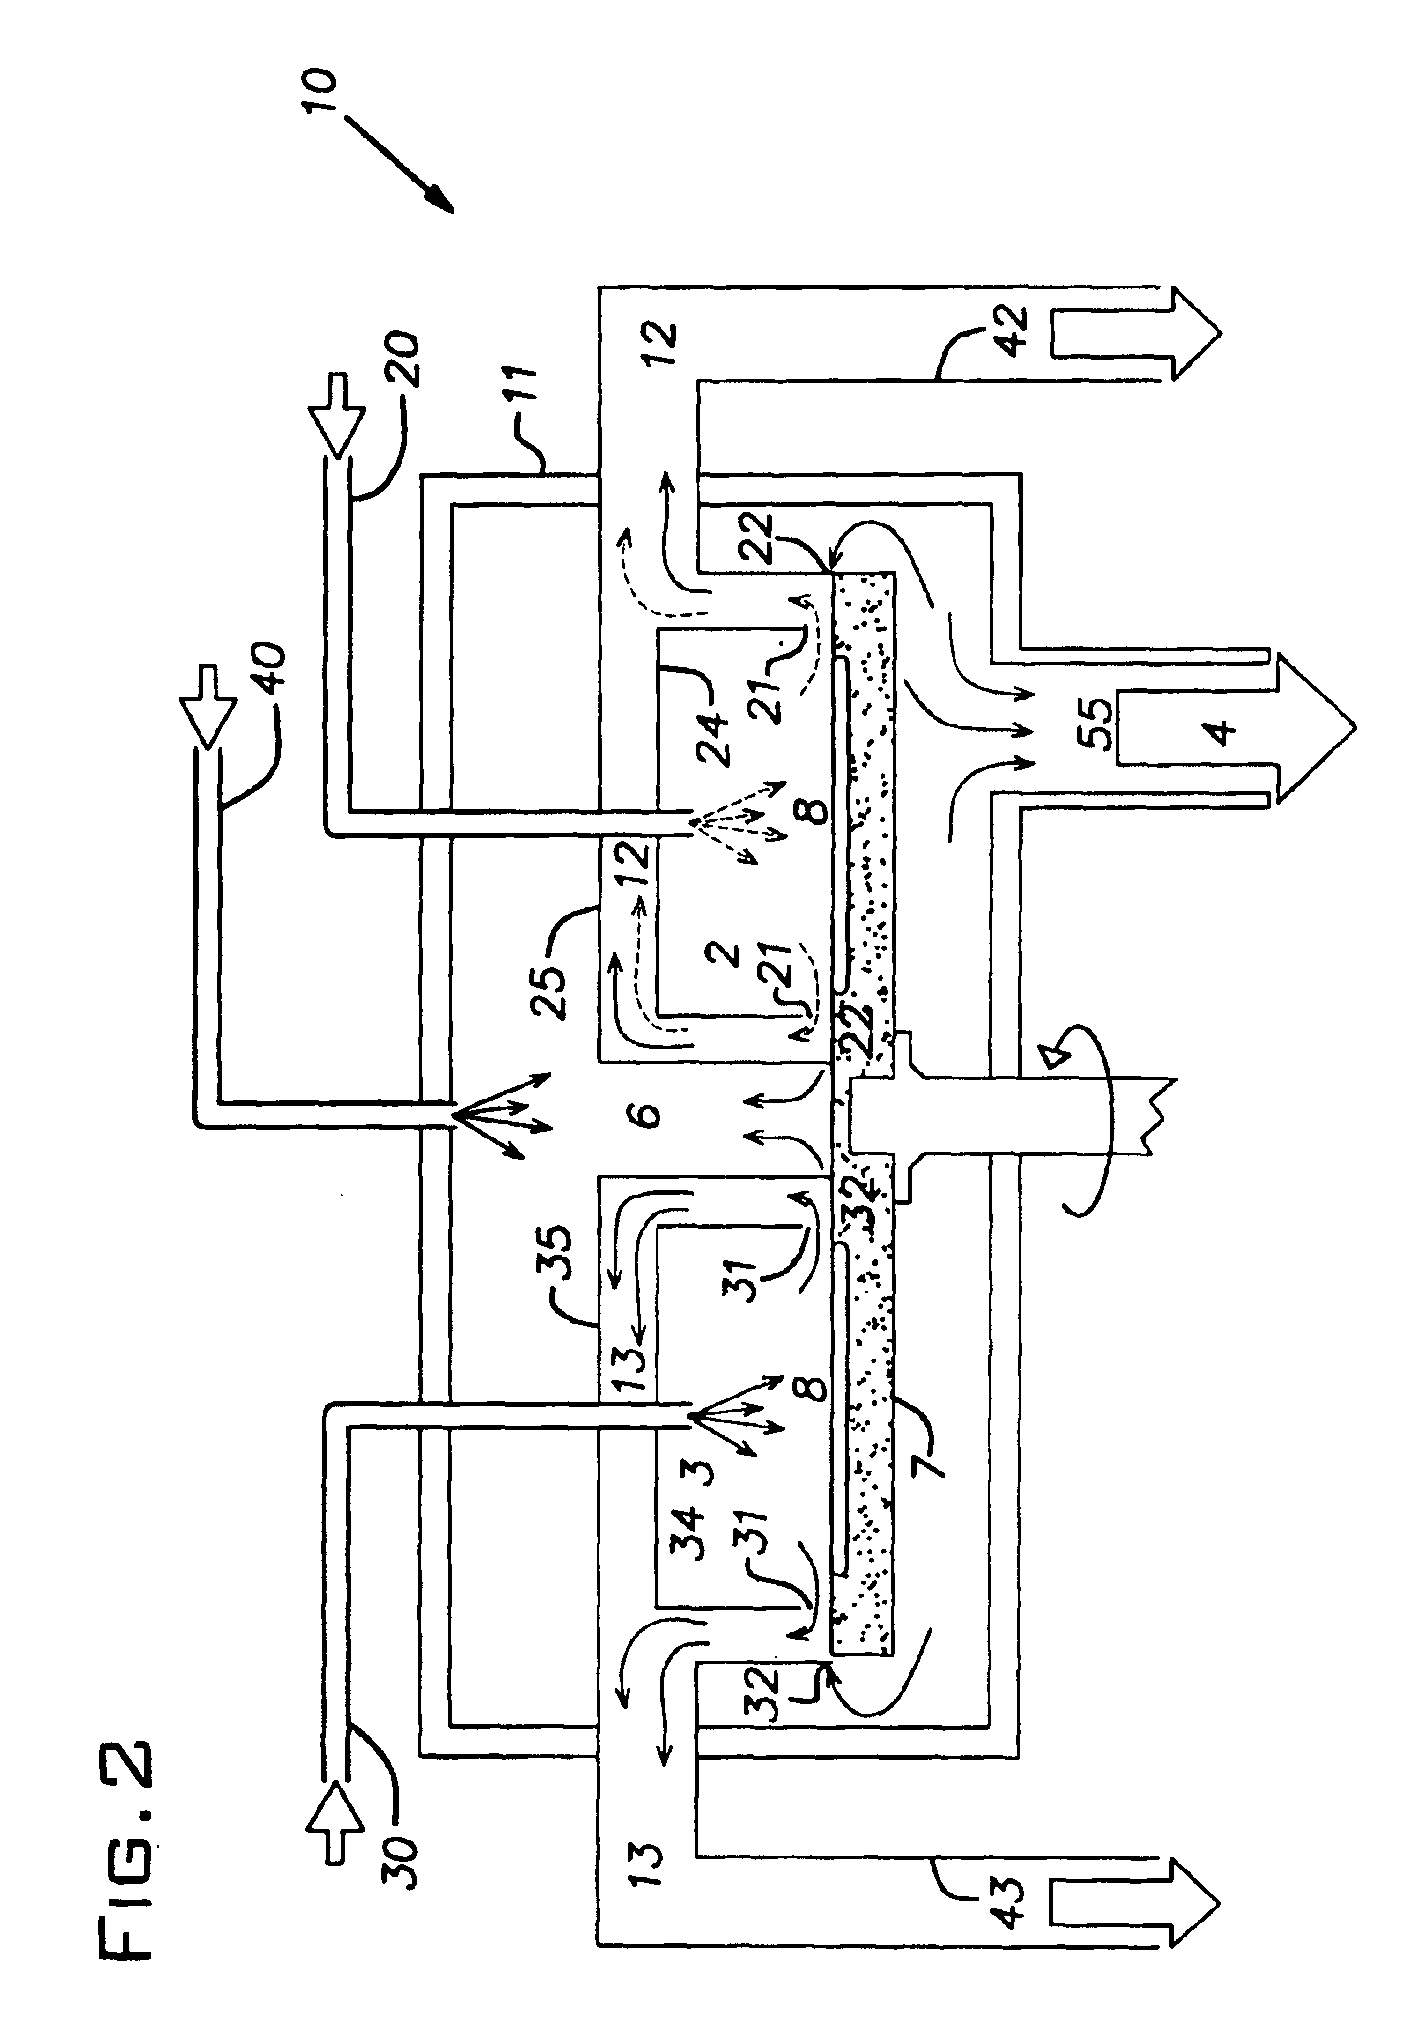 Method and apparatus for ALD on a rotary susceptor